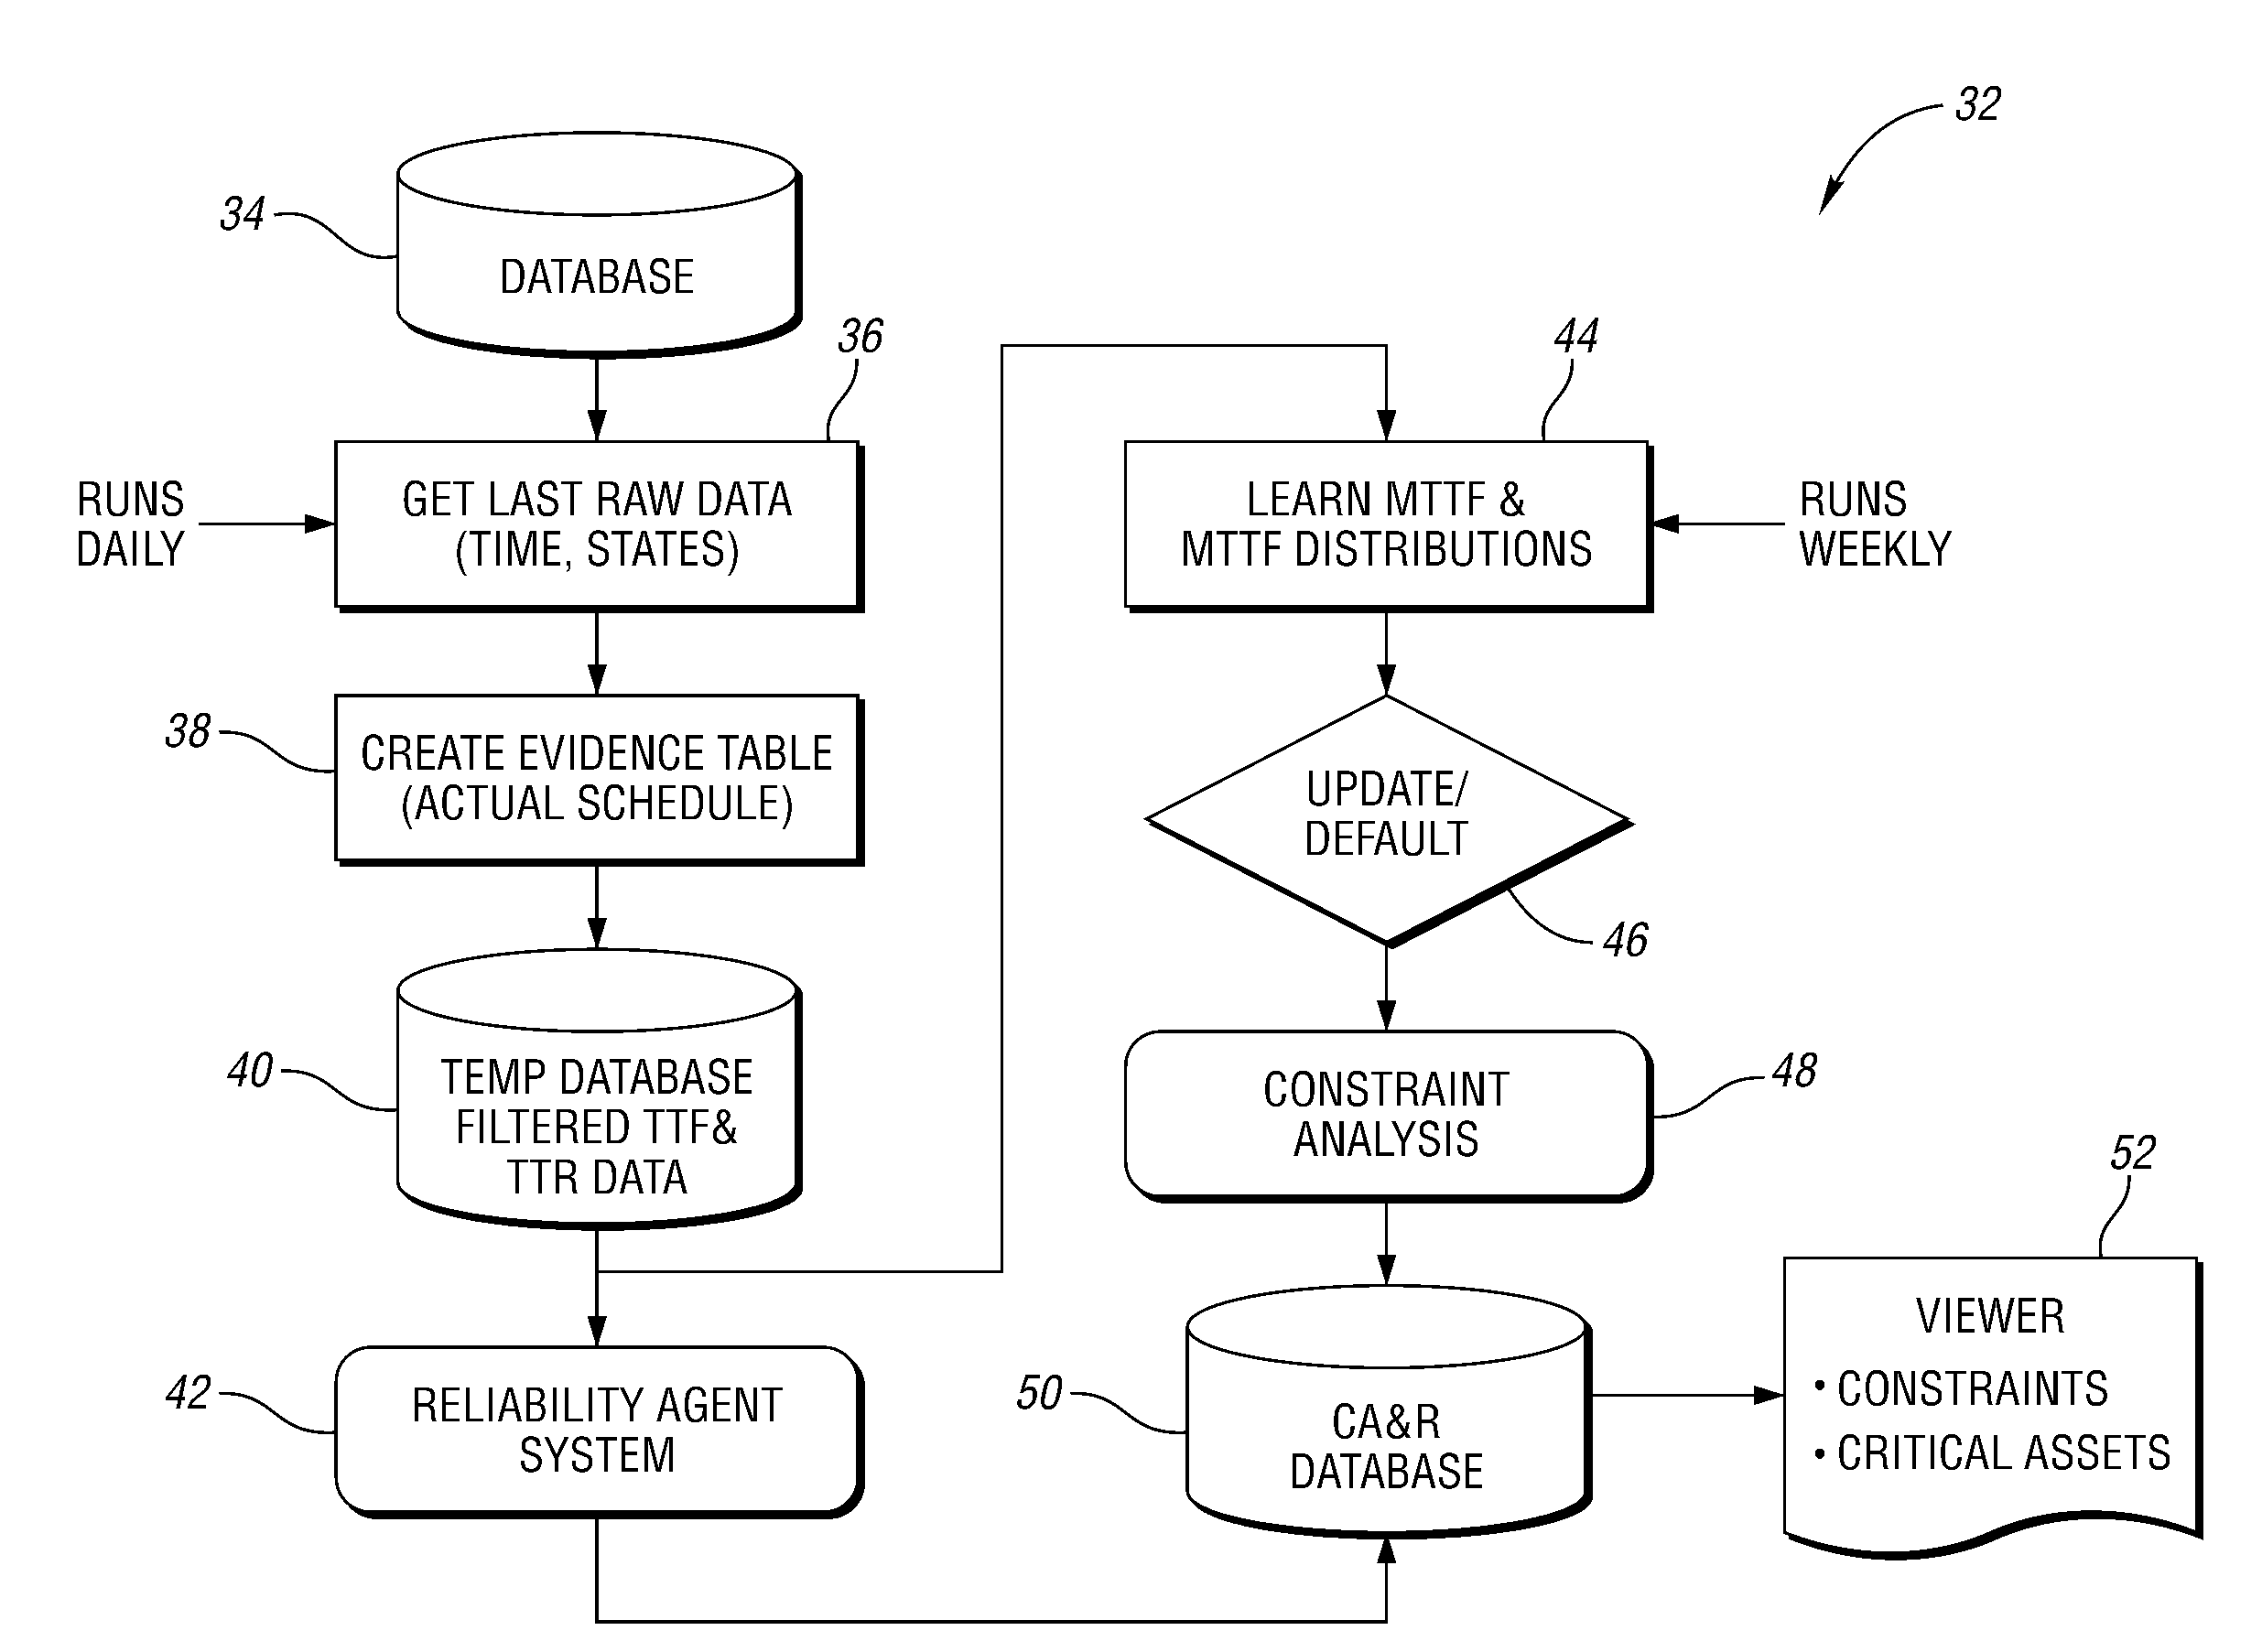 Method for analyzing operation of a machine